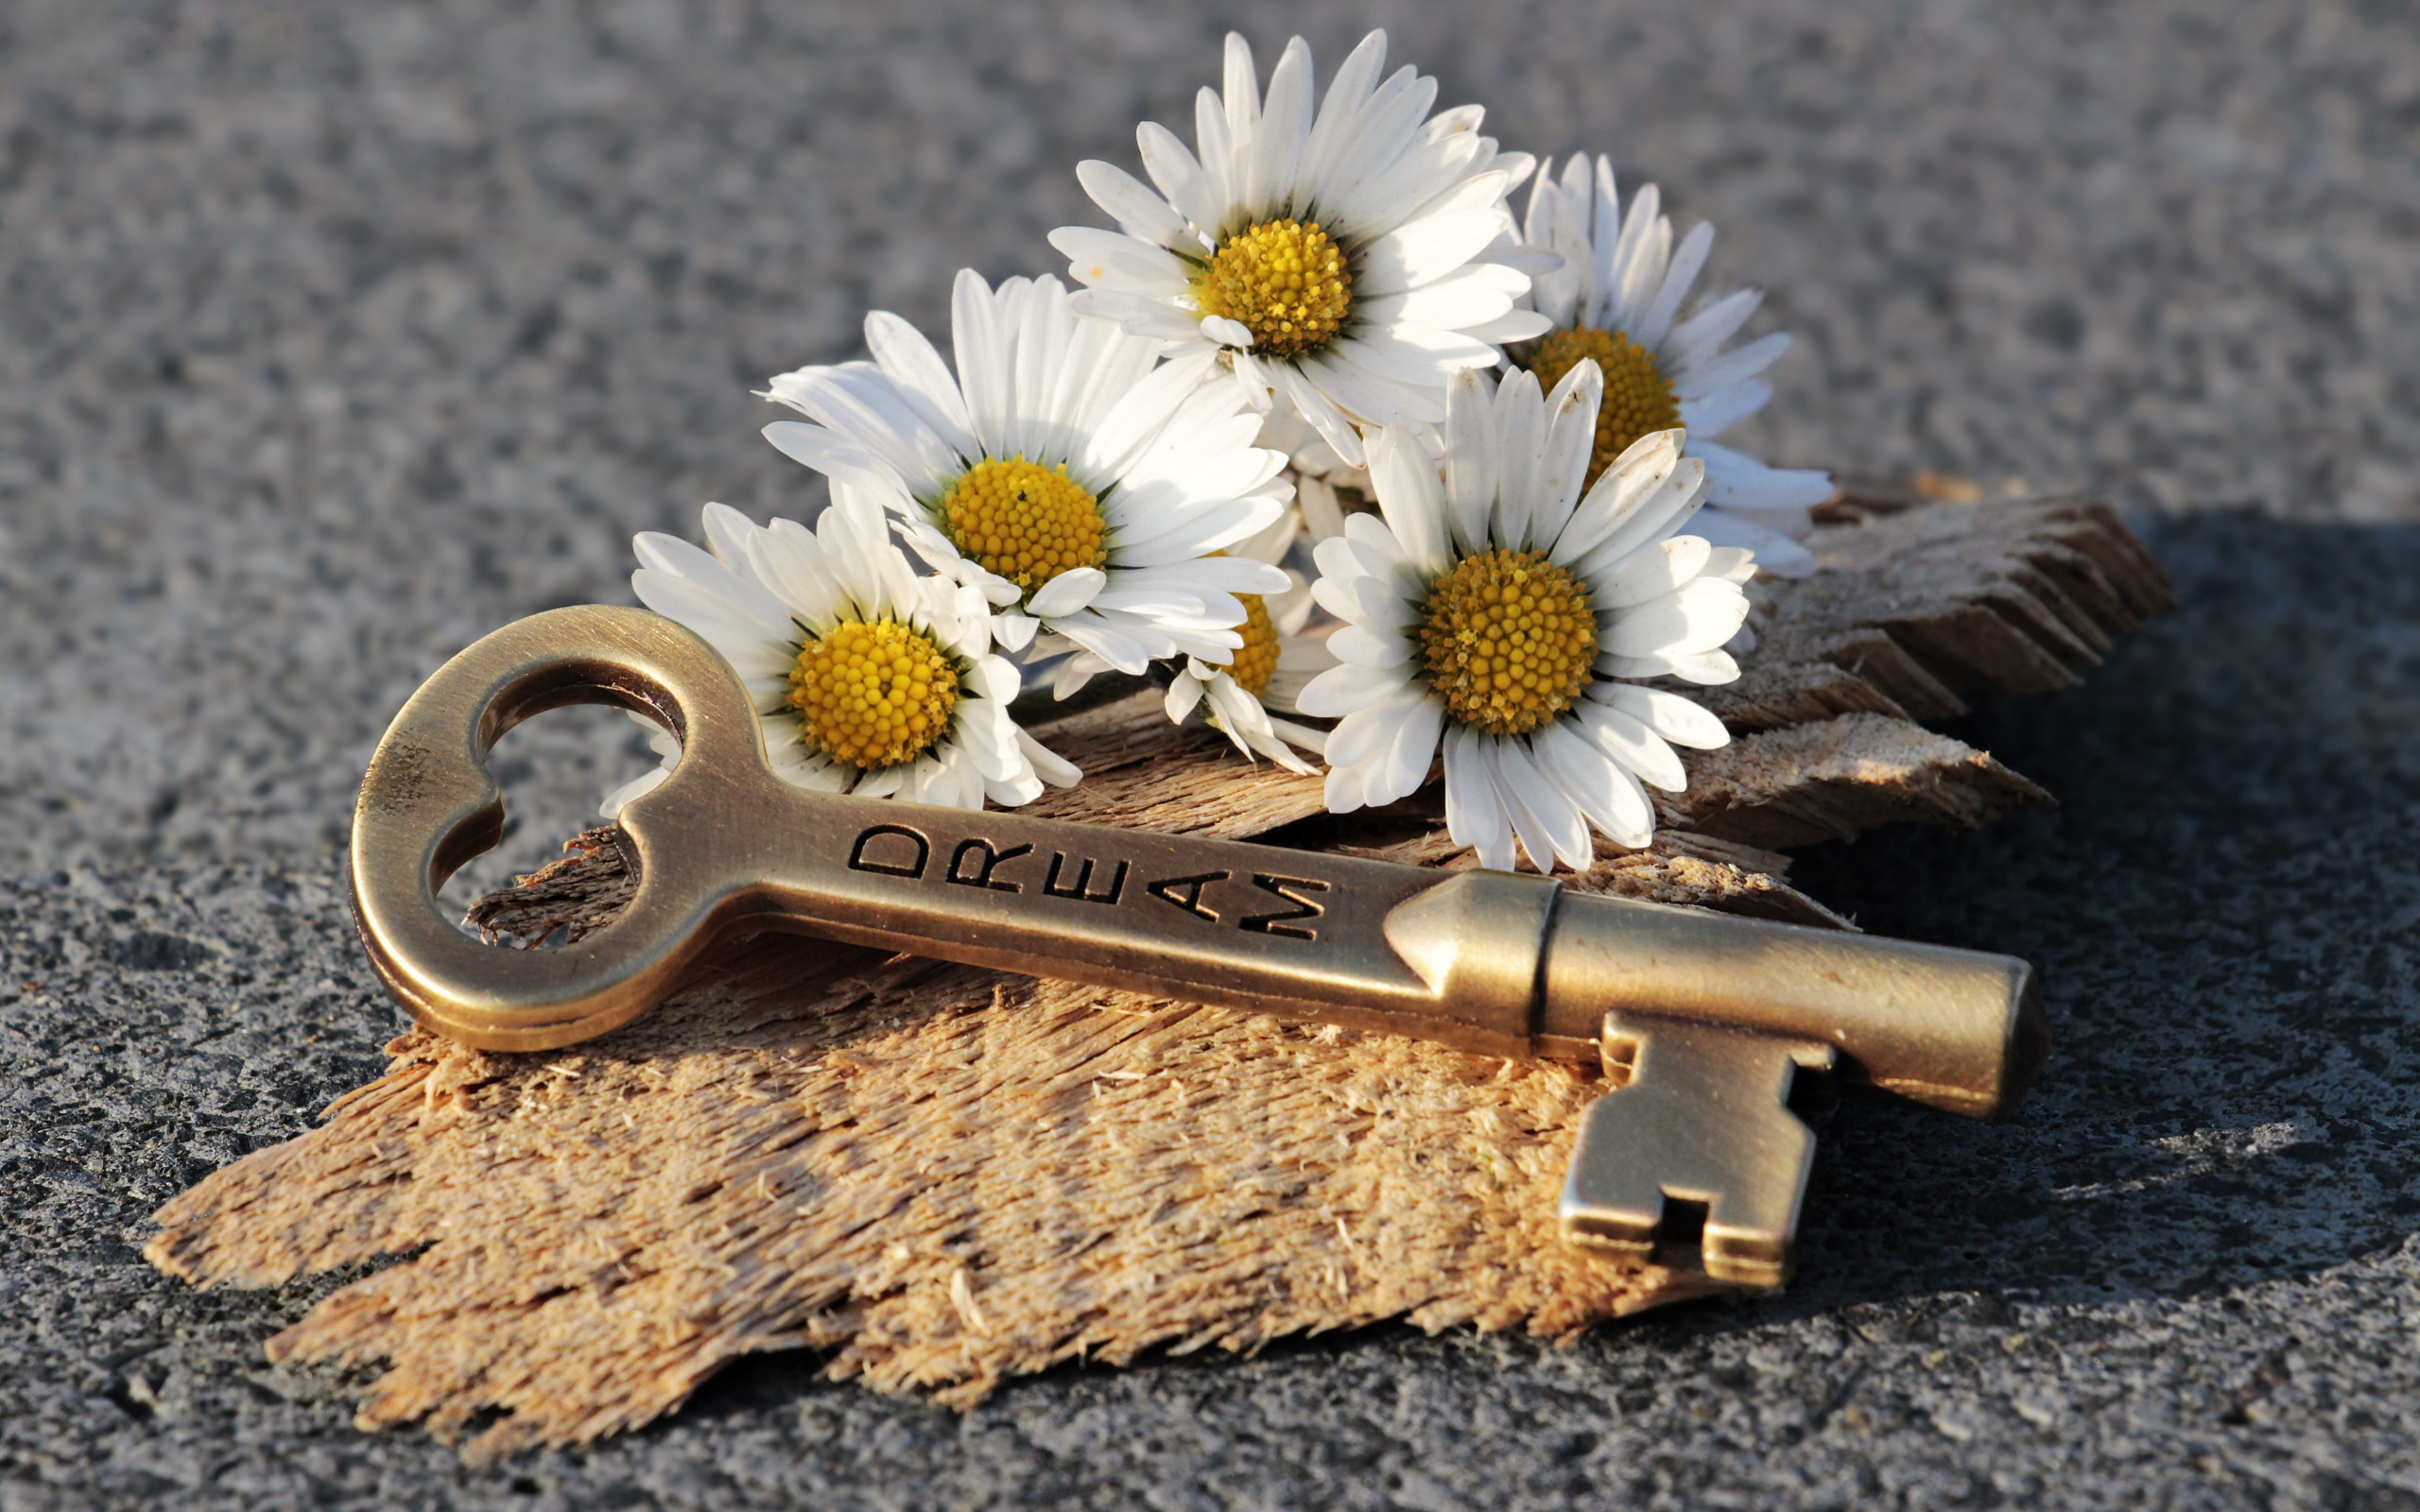 The dreams key and daisy flowers wallpaper 2560x1600